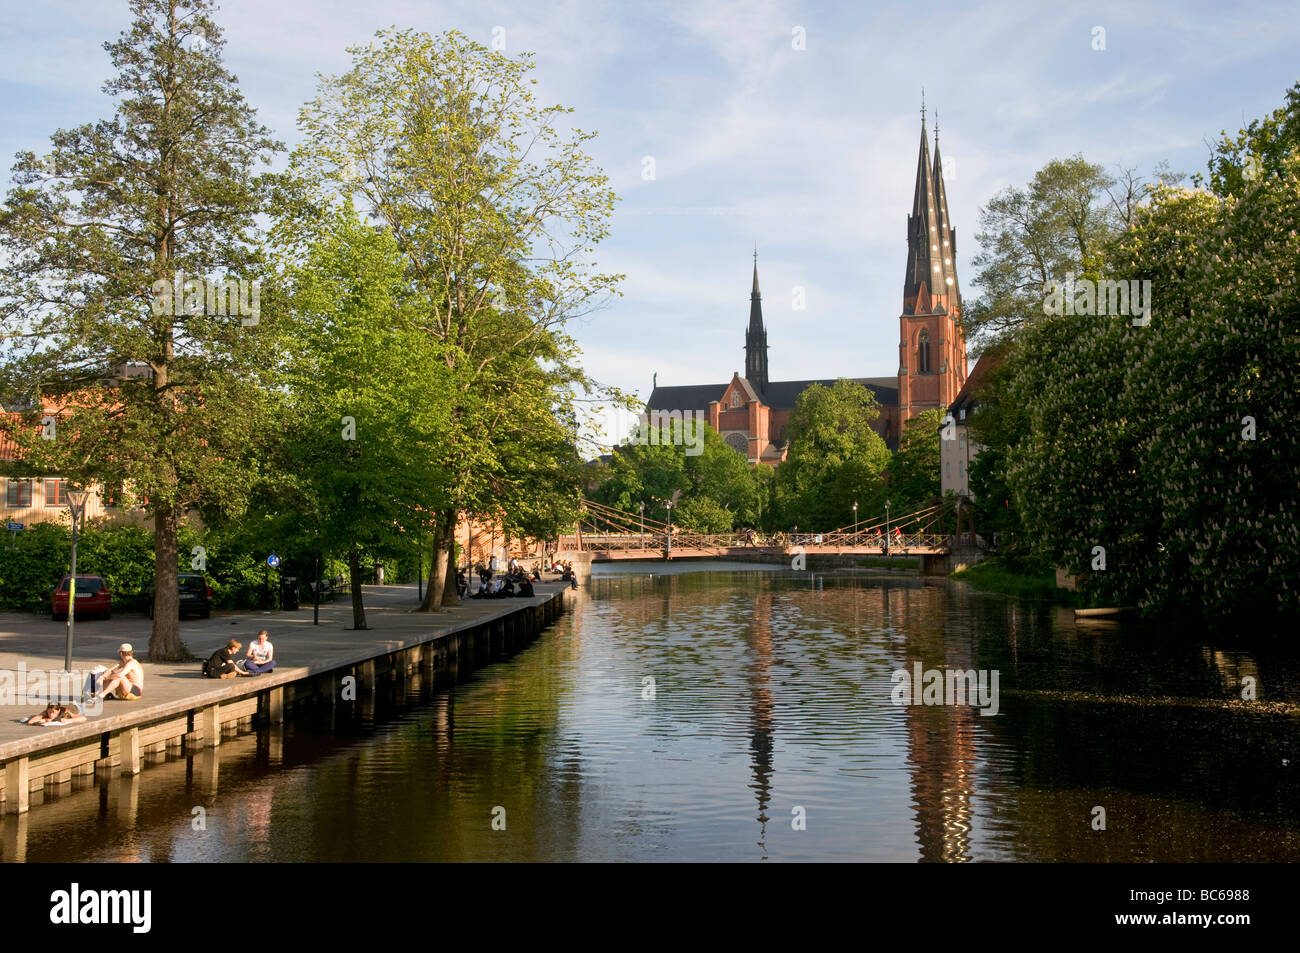 People sitting on the banks of river Fyrisån, in Uppsala, Sweden, with Uppsala Cathedral in the background Stock Photo